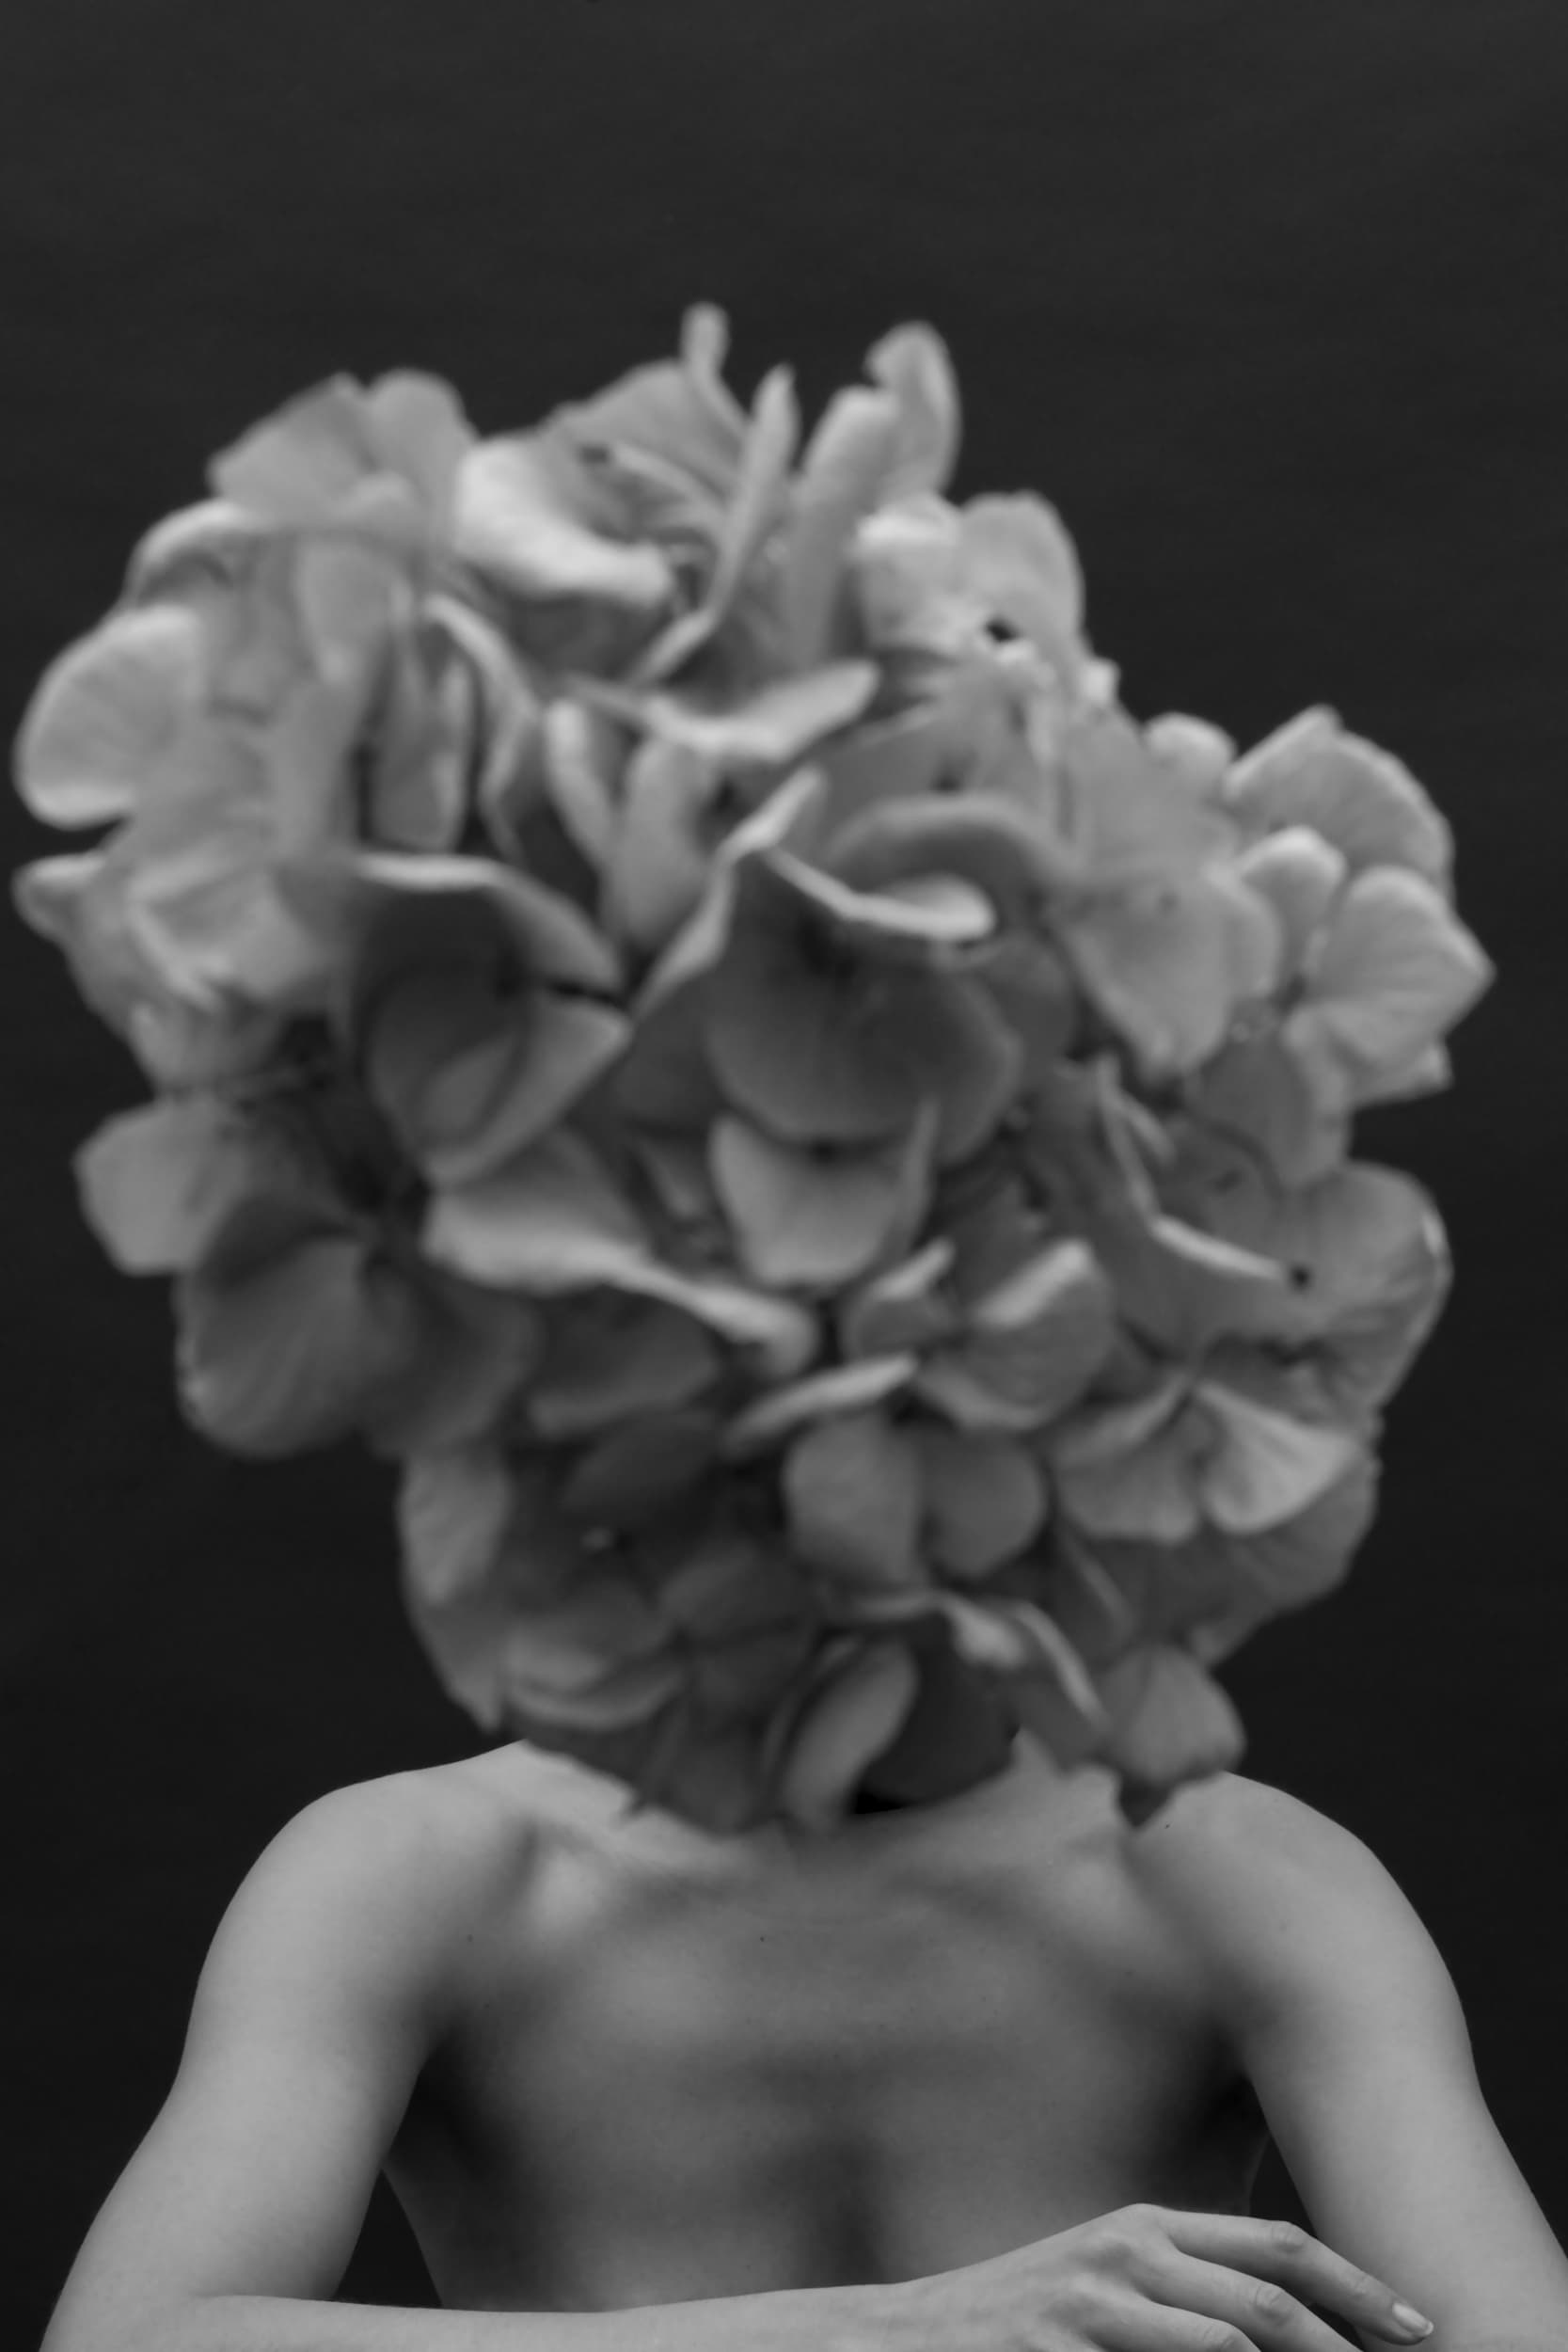 The artpiece 'Elle' by Mathieu Puga shows a sitting woman, with her arms crossed on top of a table, while her face is covered with a large flower, making her anonymous.